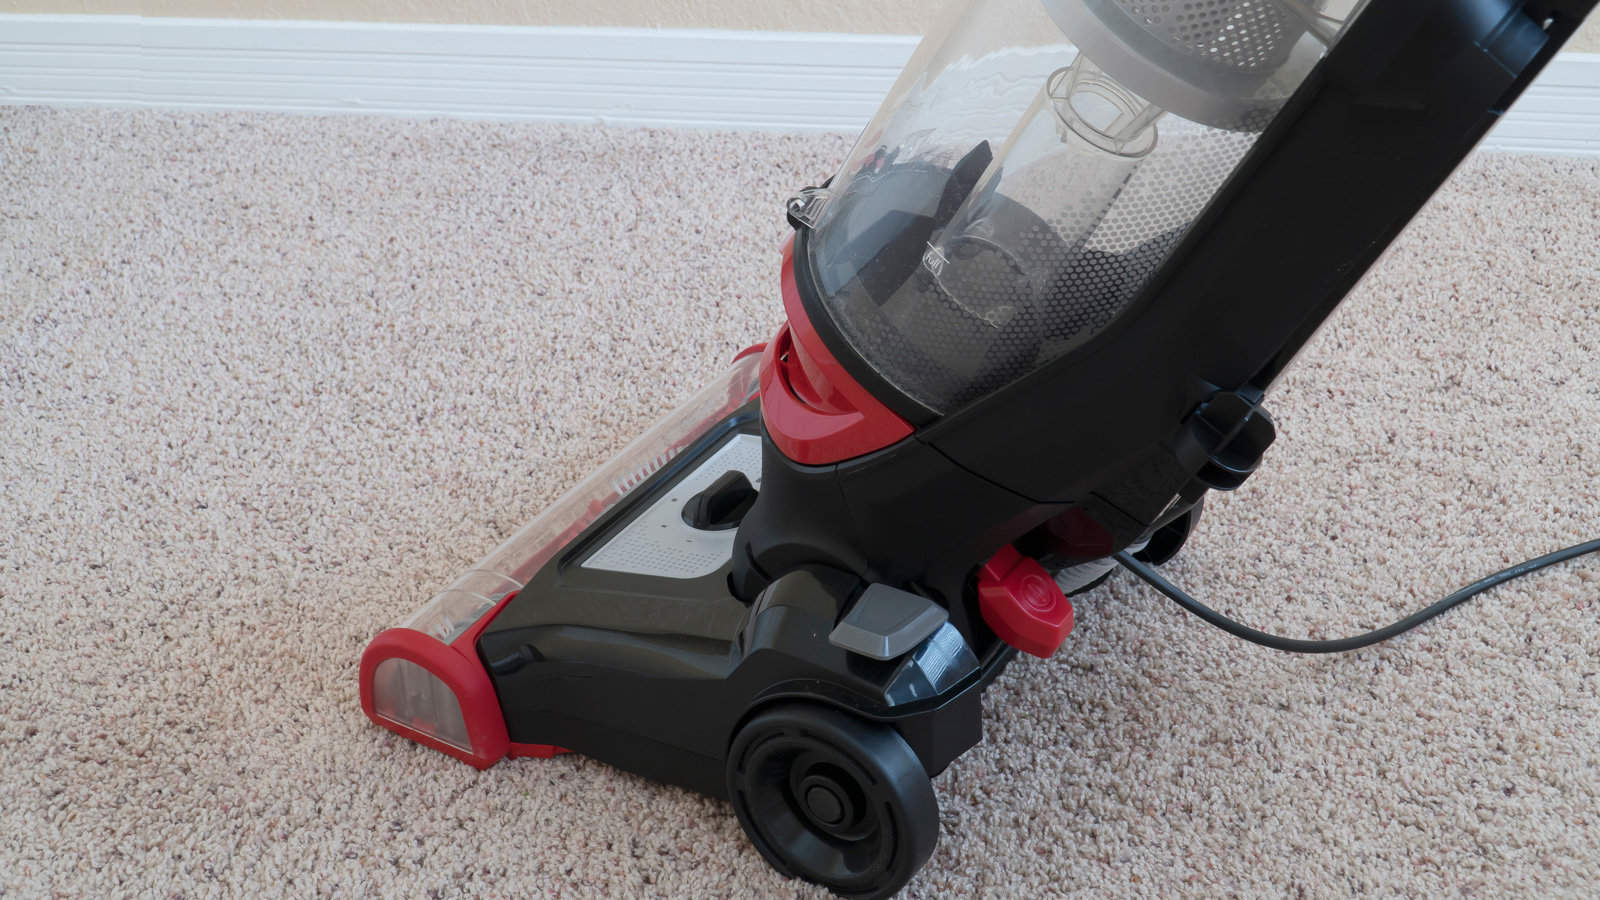 Vacuum cleaner is used to clean a carpet surface while doing household chores